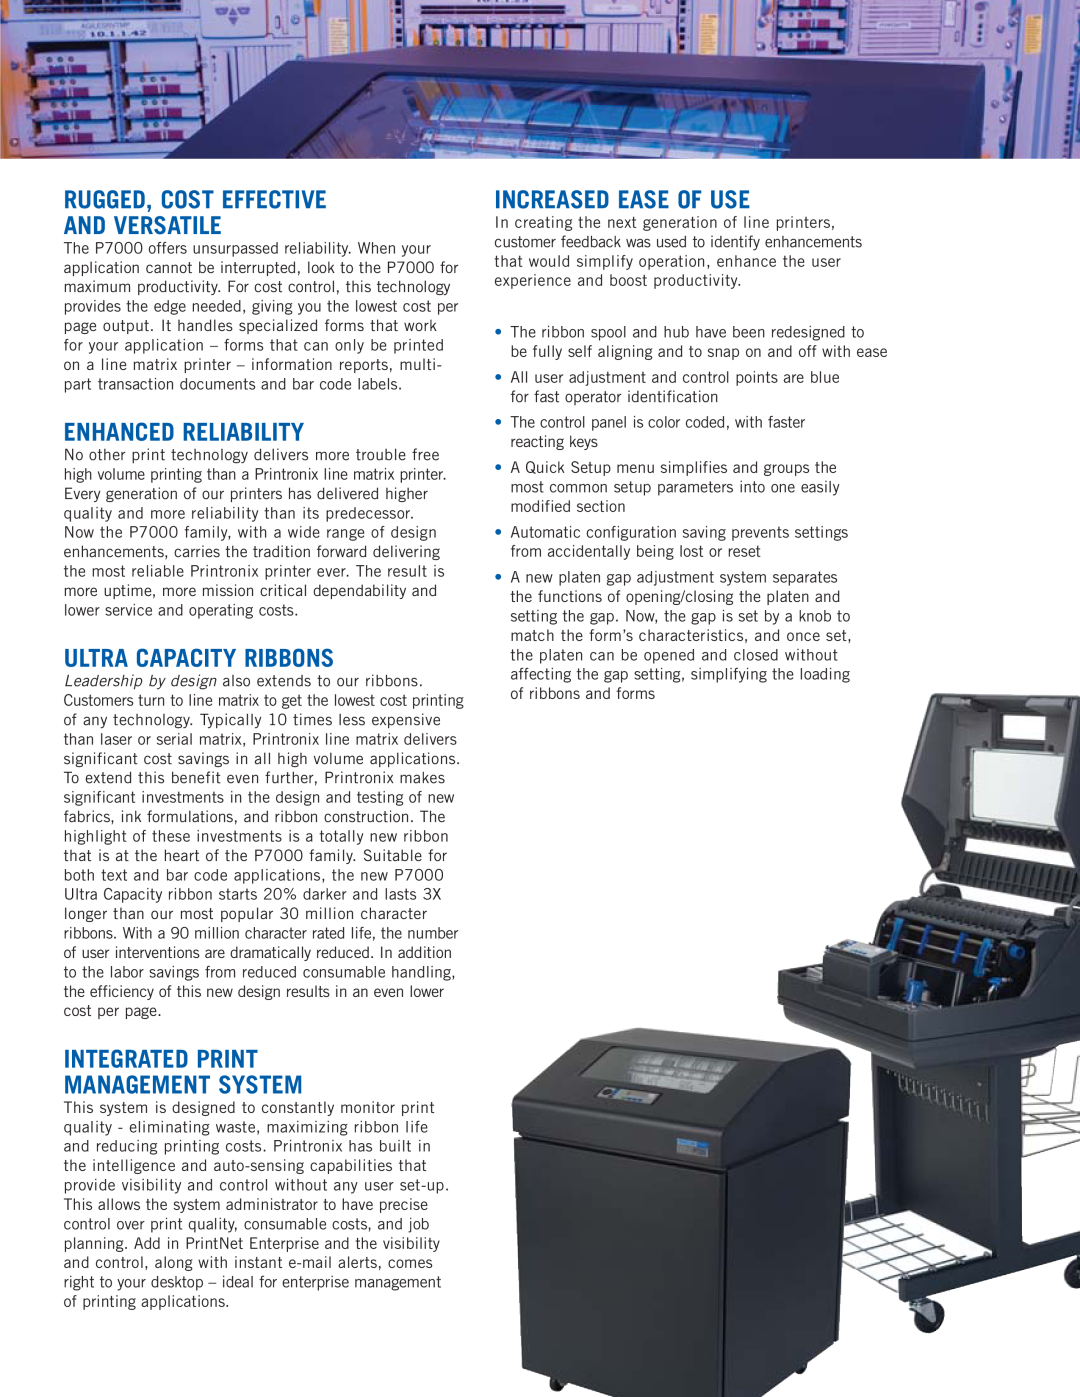 Printronix laser printers manual Rugged, Cost Effective And Versatile, Enhanced Reliability, Ultra Capacity Ribbons 